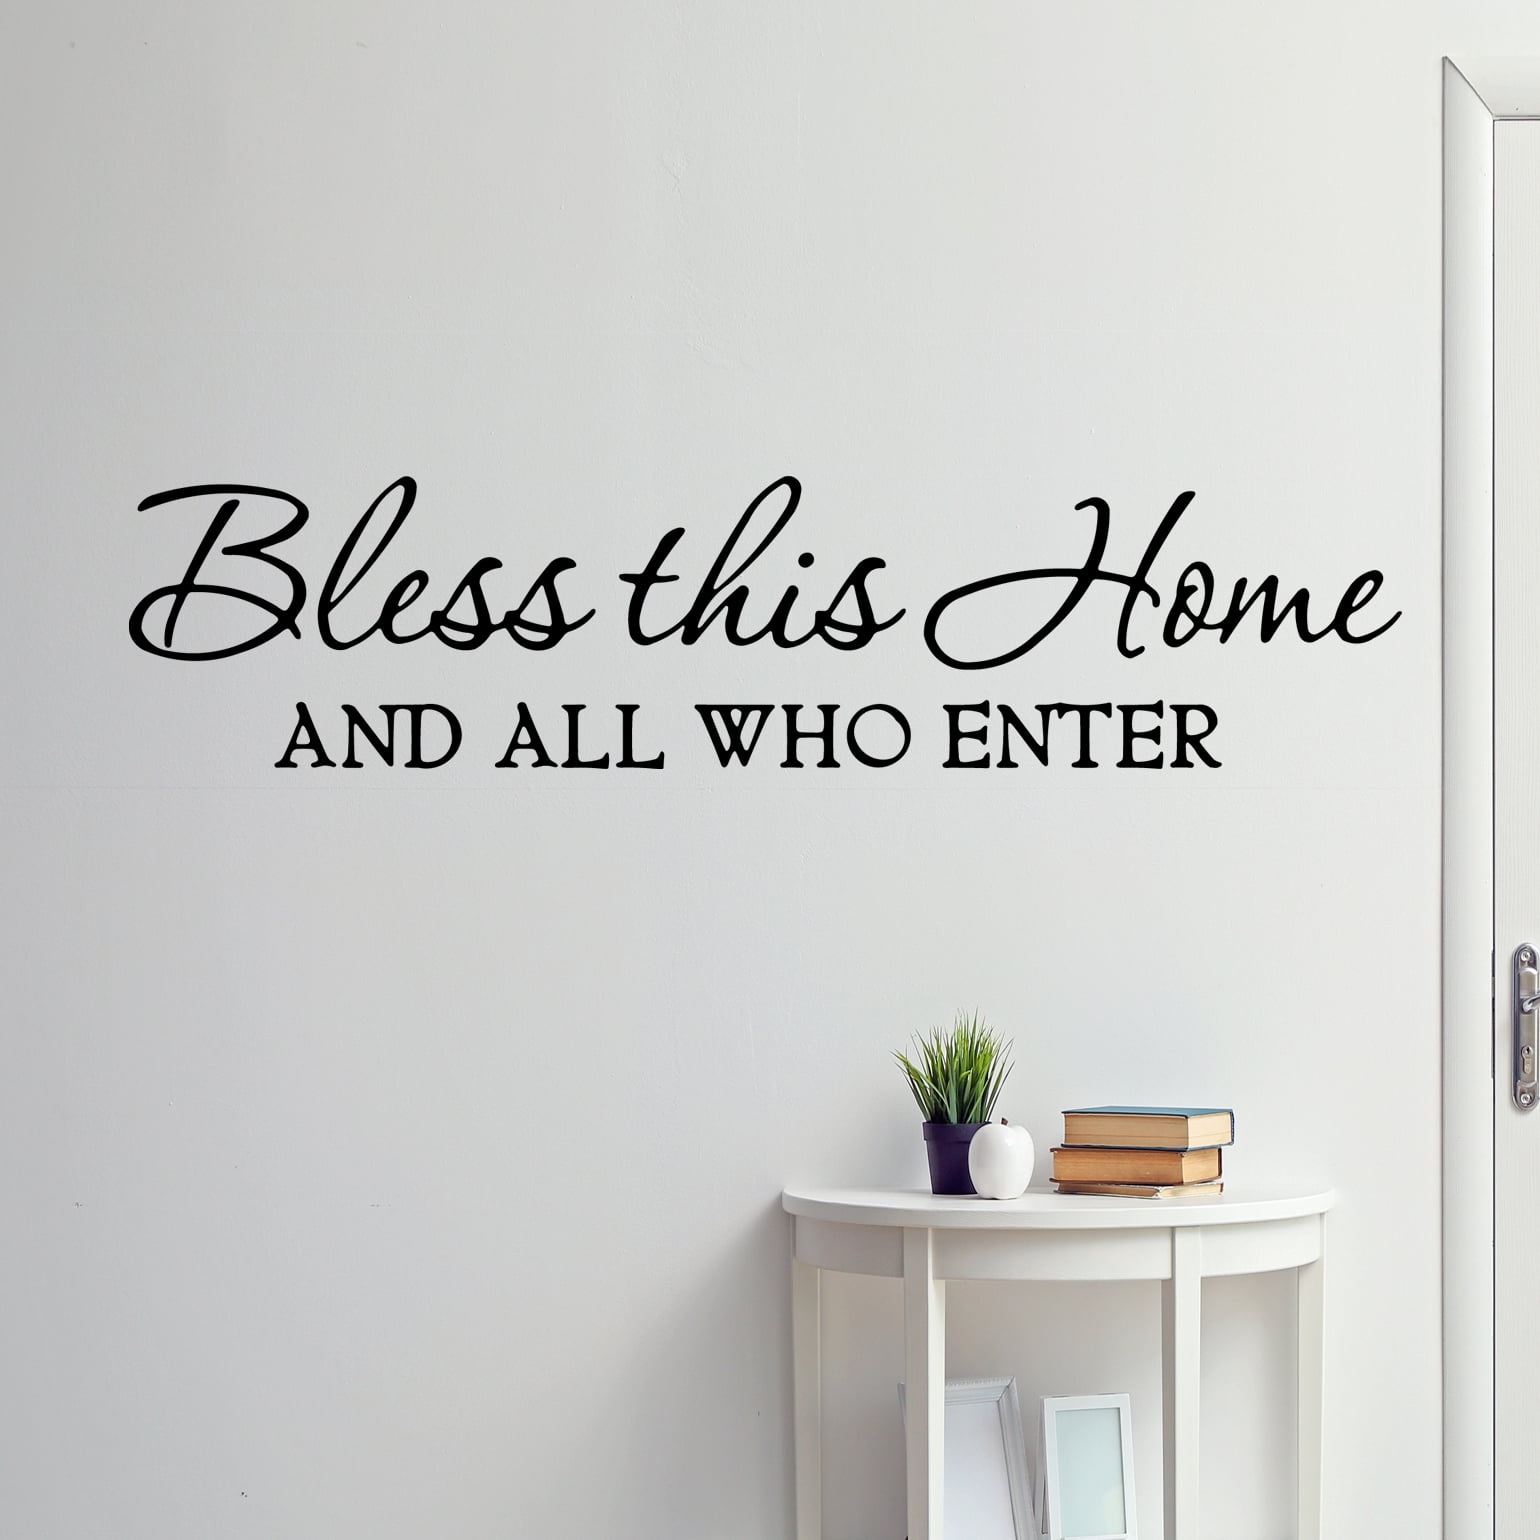 BLESS THIS HOME AND ALL WHO ENTER VINYL WALL DECAL HOME WALL LETTERING STICKER 